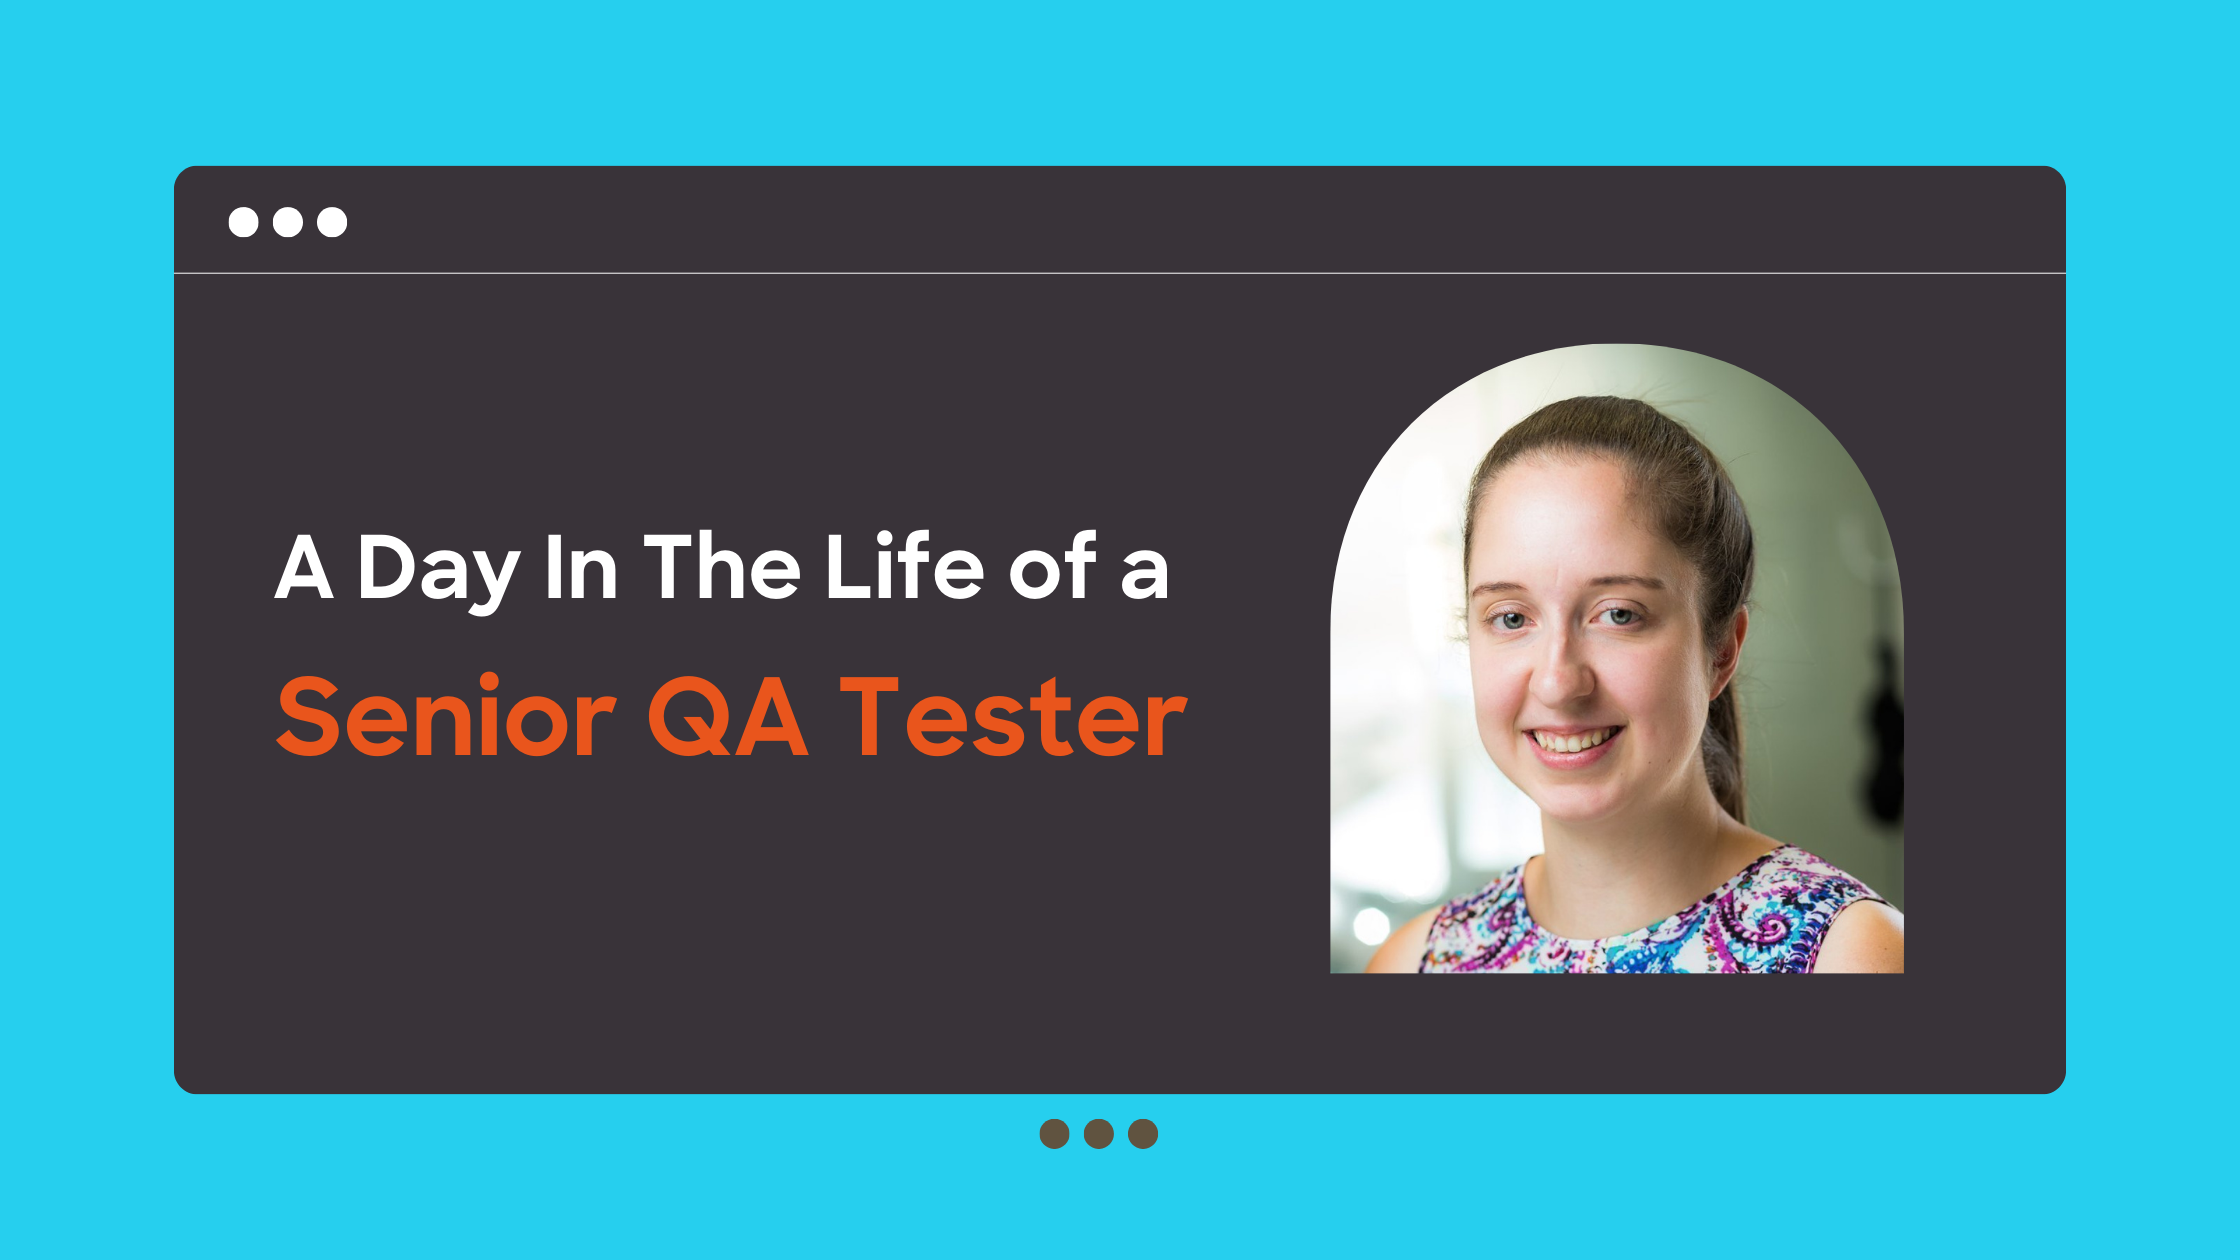 A day in the life of a Senior QA Tester, Helen, at cti digital